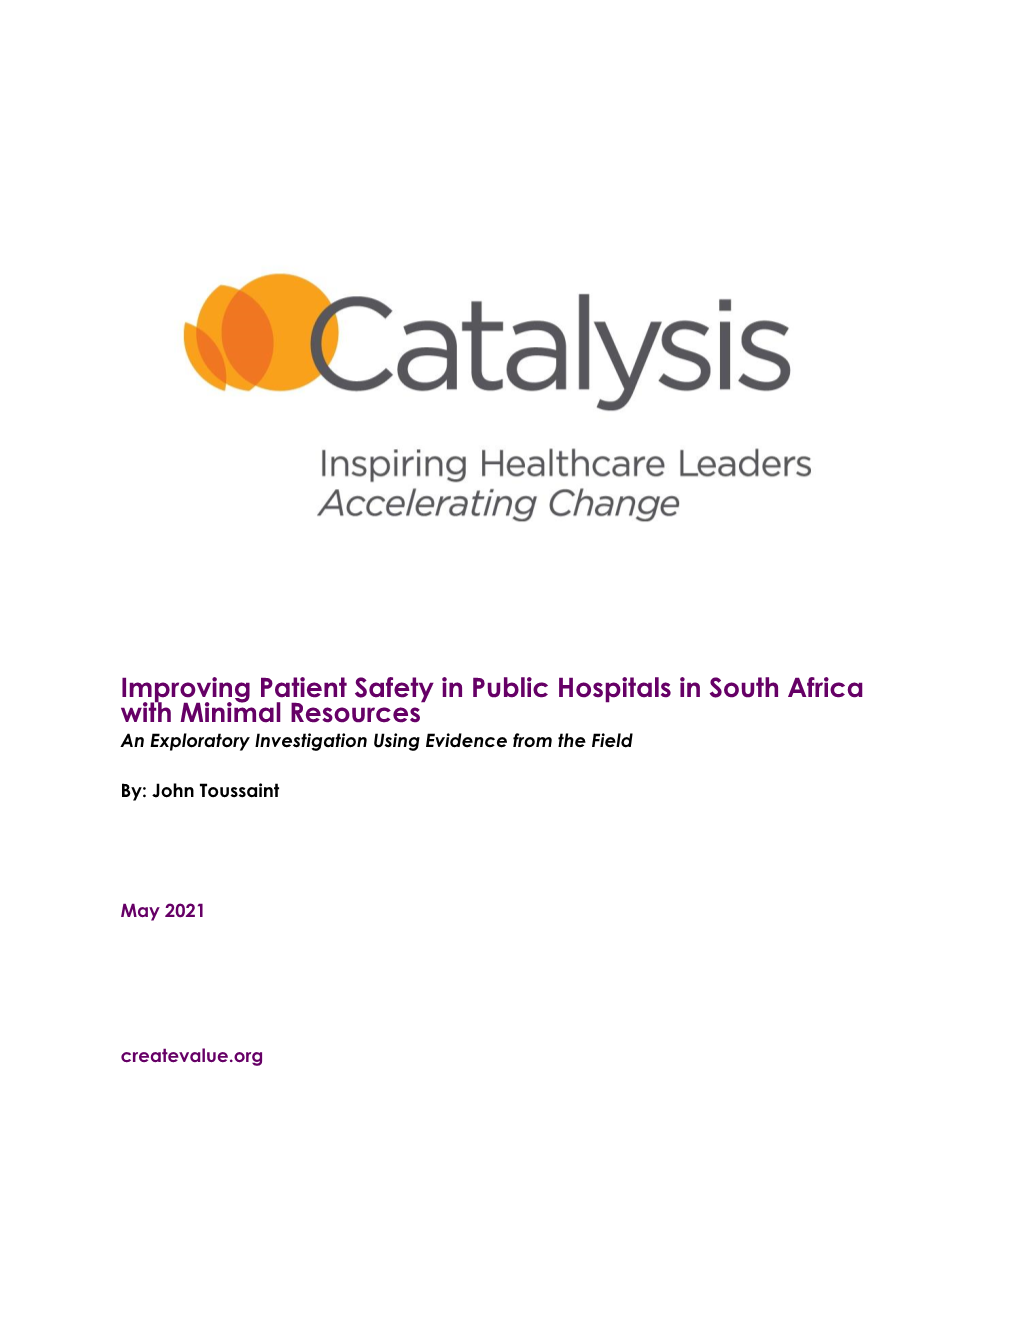 Improving Patient Safety in Public Hospitals in South Africa with Minimal Resources an Exploratory Investigation Using Evidence from the Field